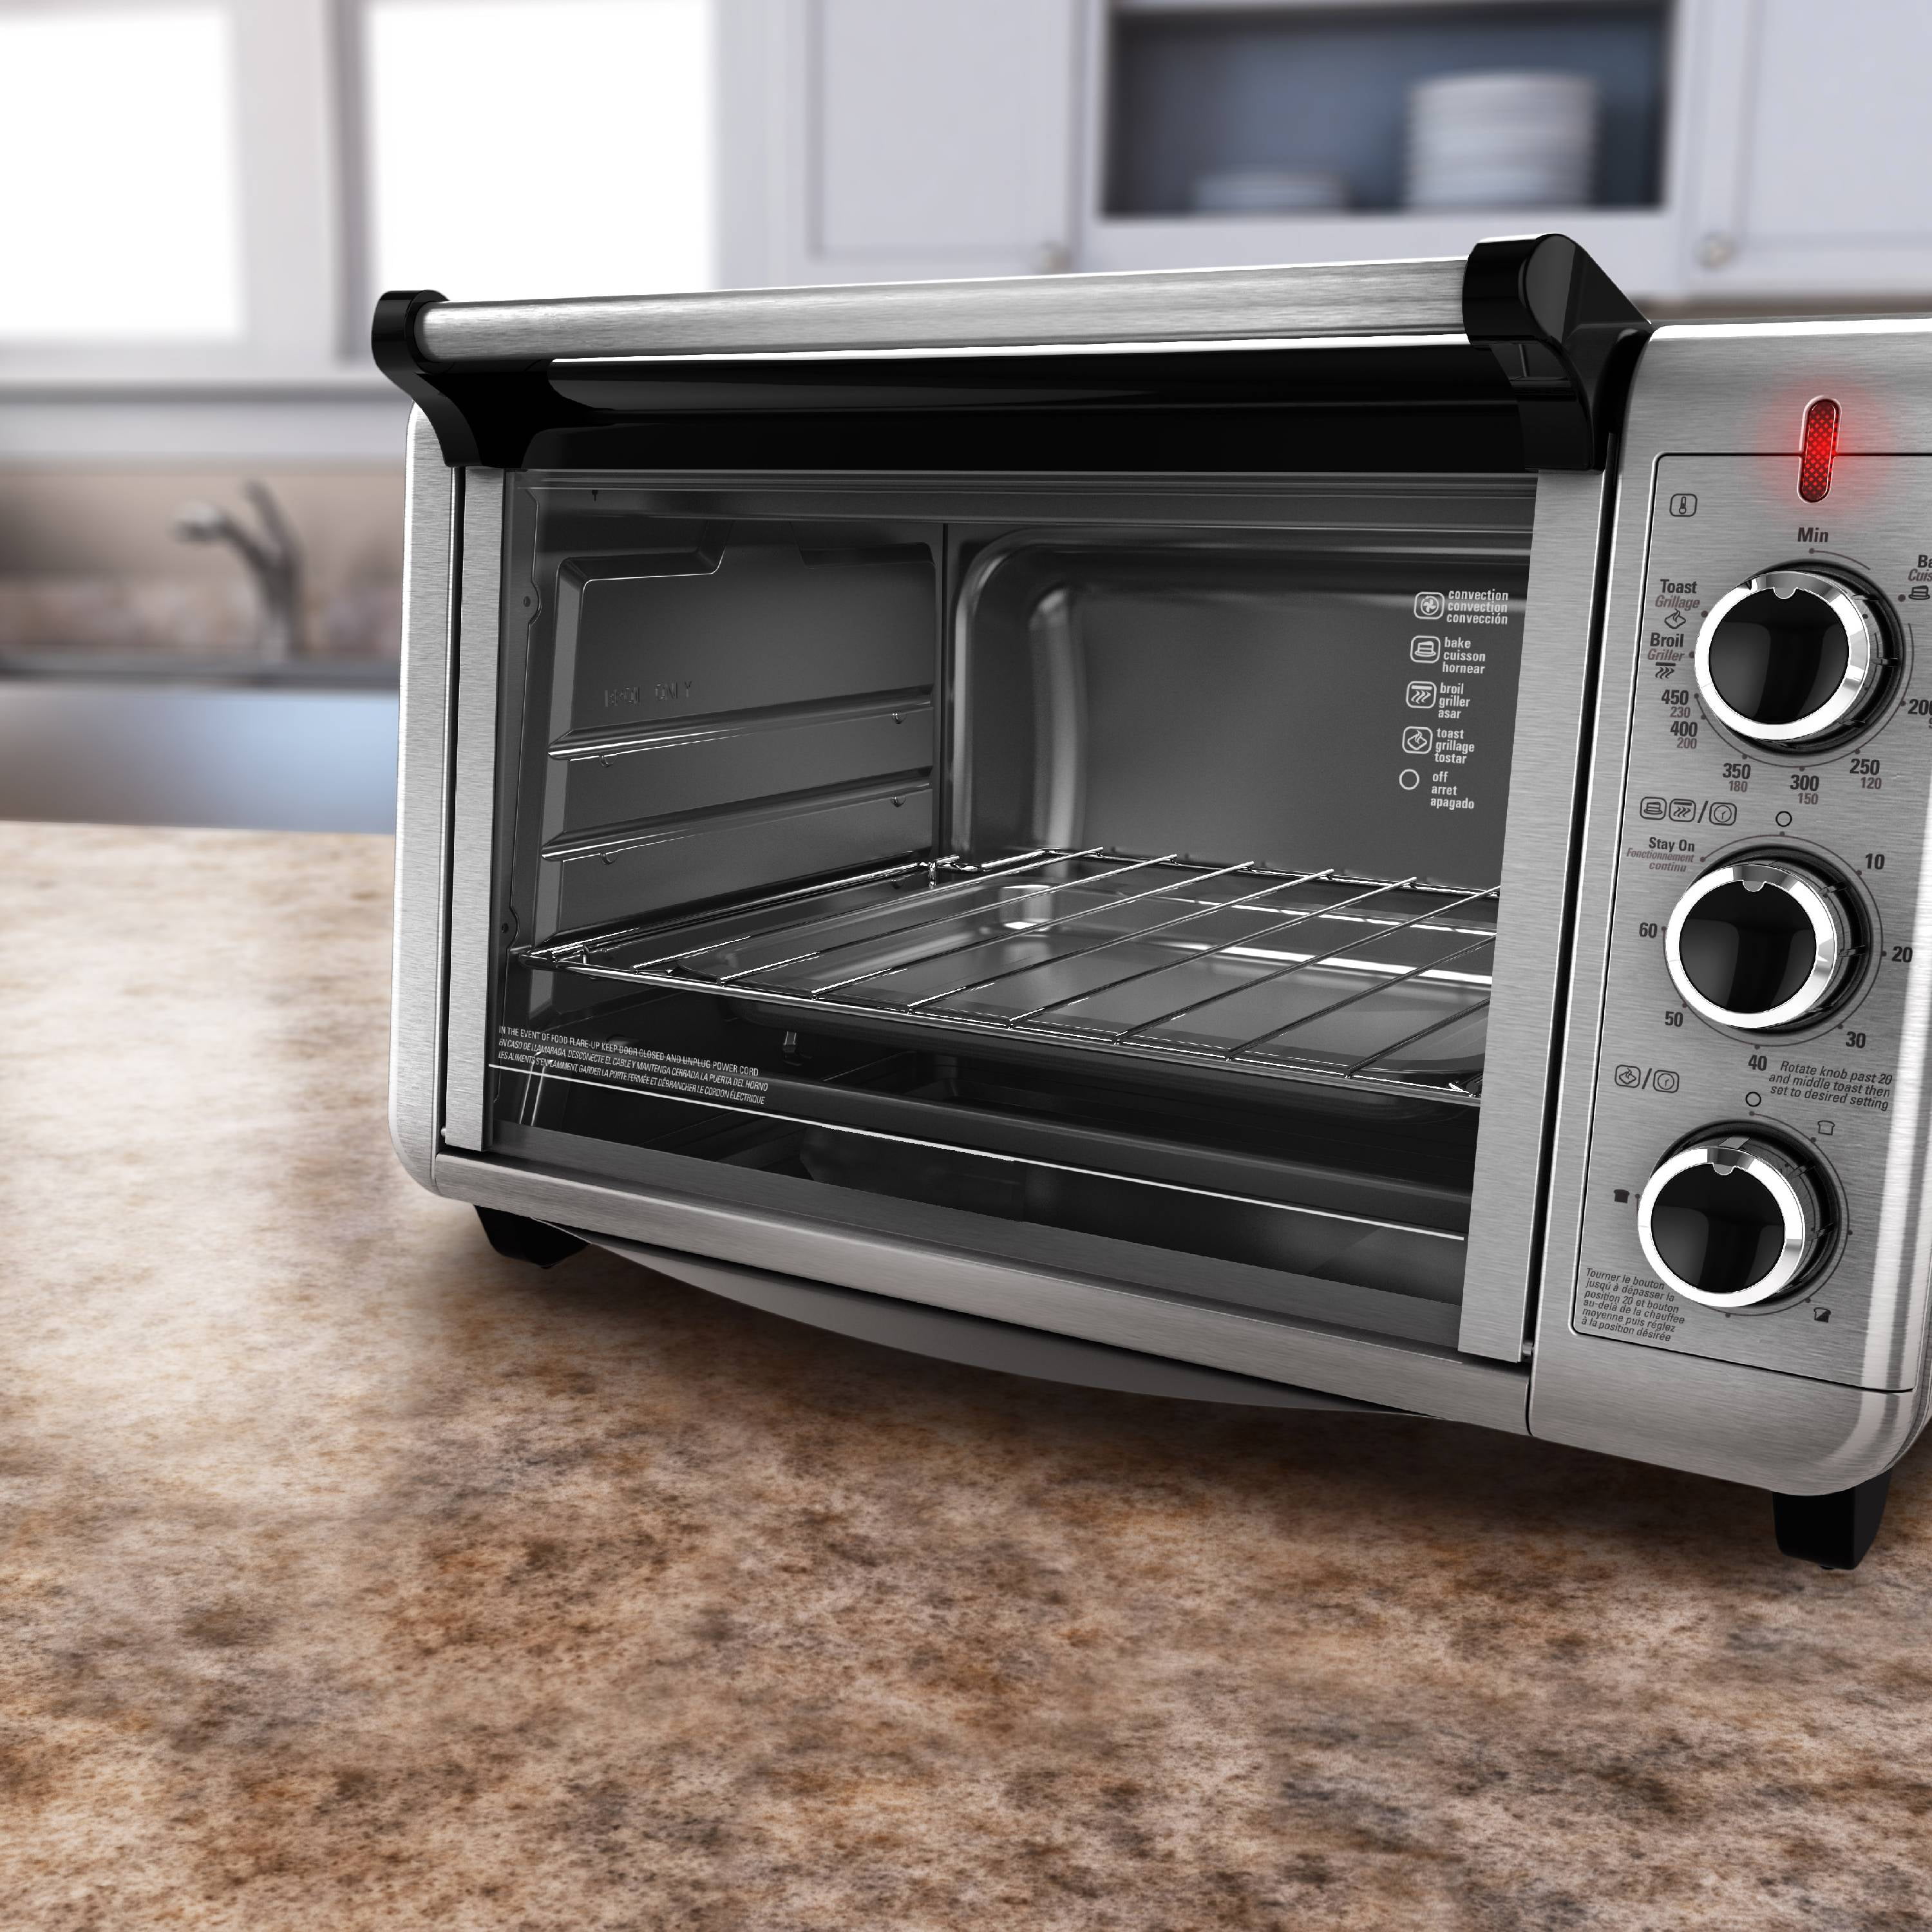 BLACK+DECKER 6-Slice Toaster Oven in Black TO1950SBD - The Home Depot